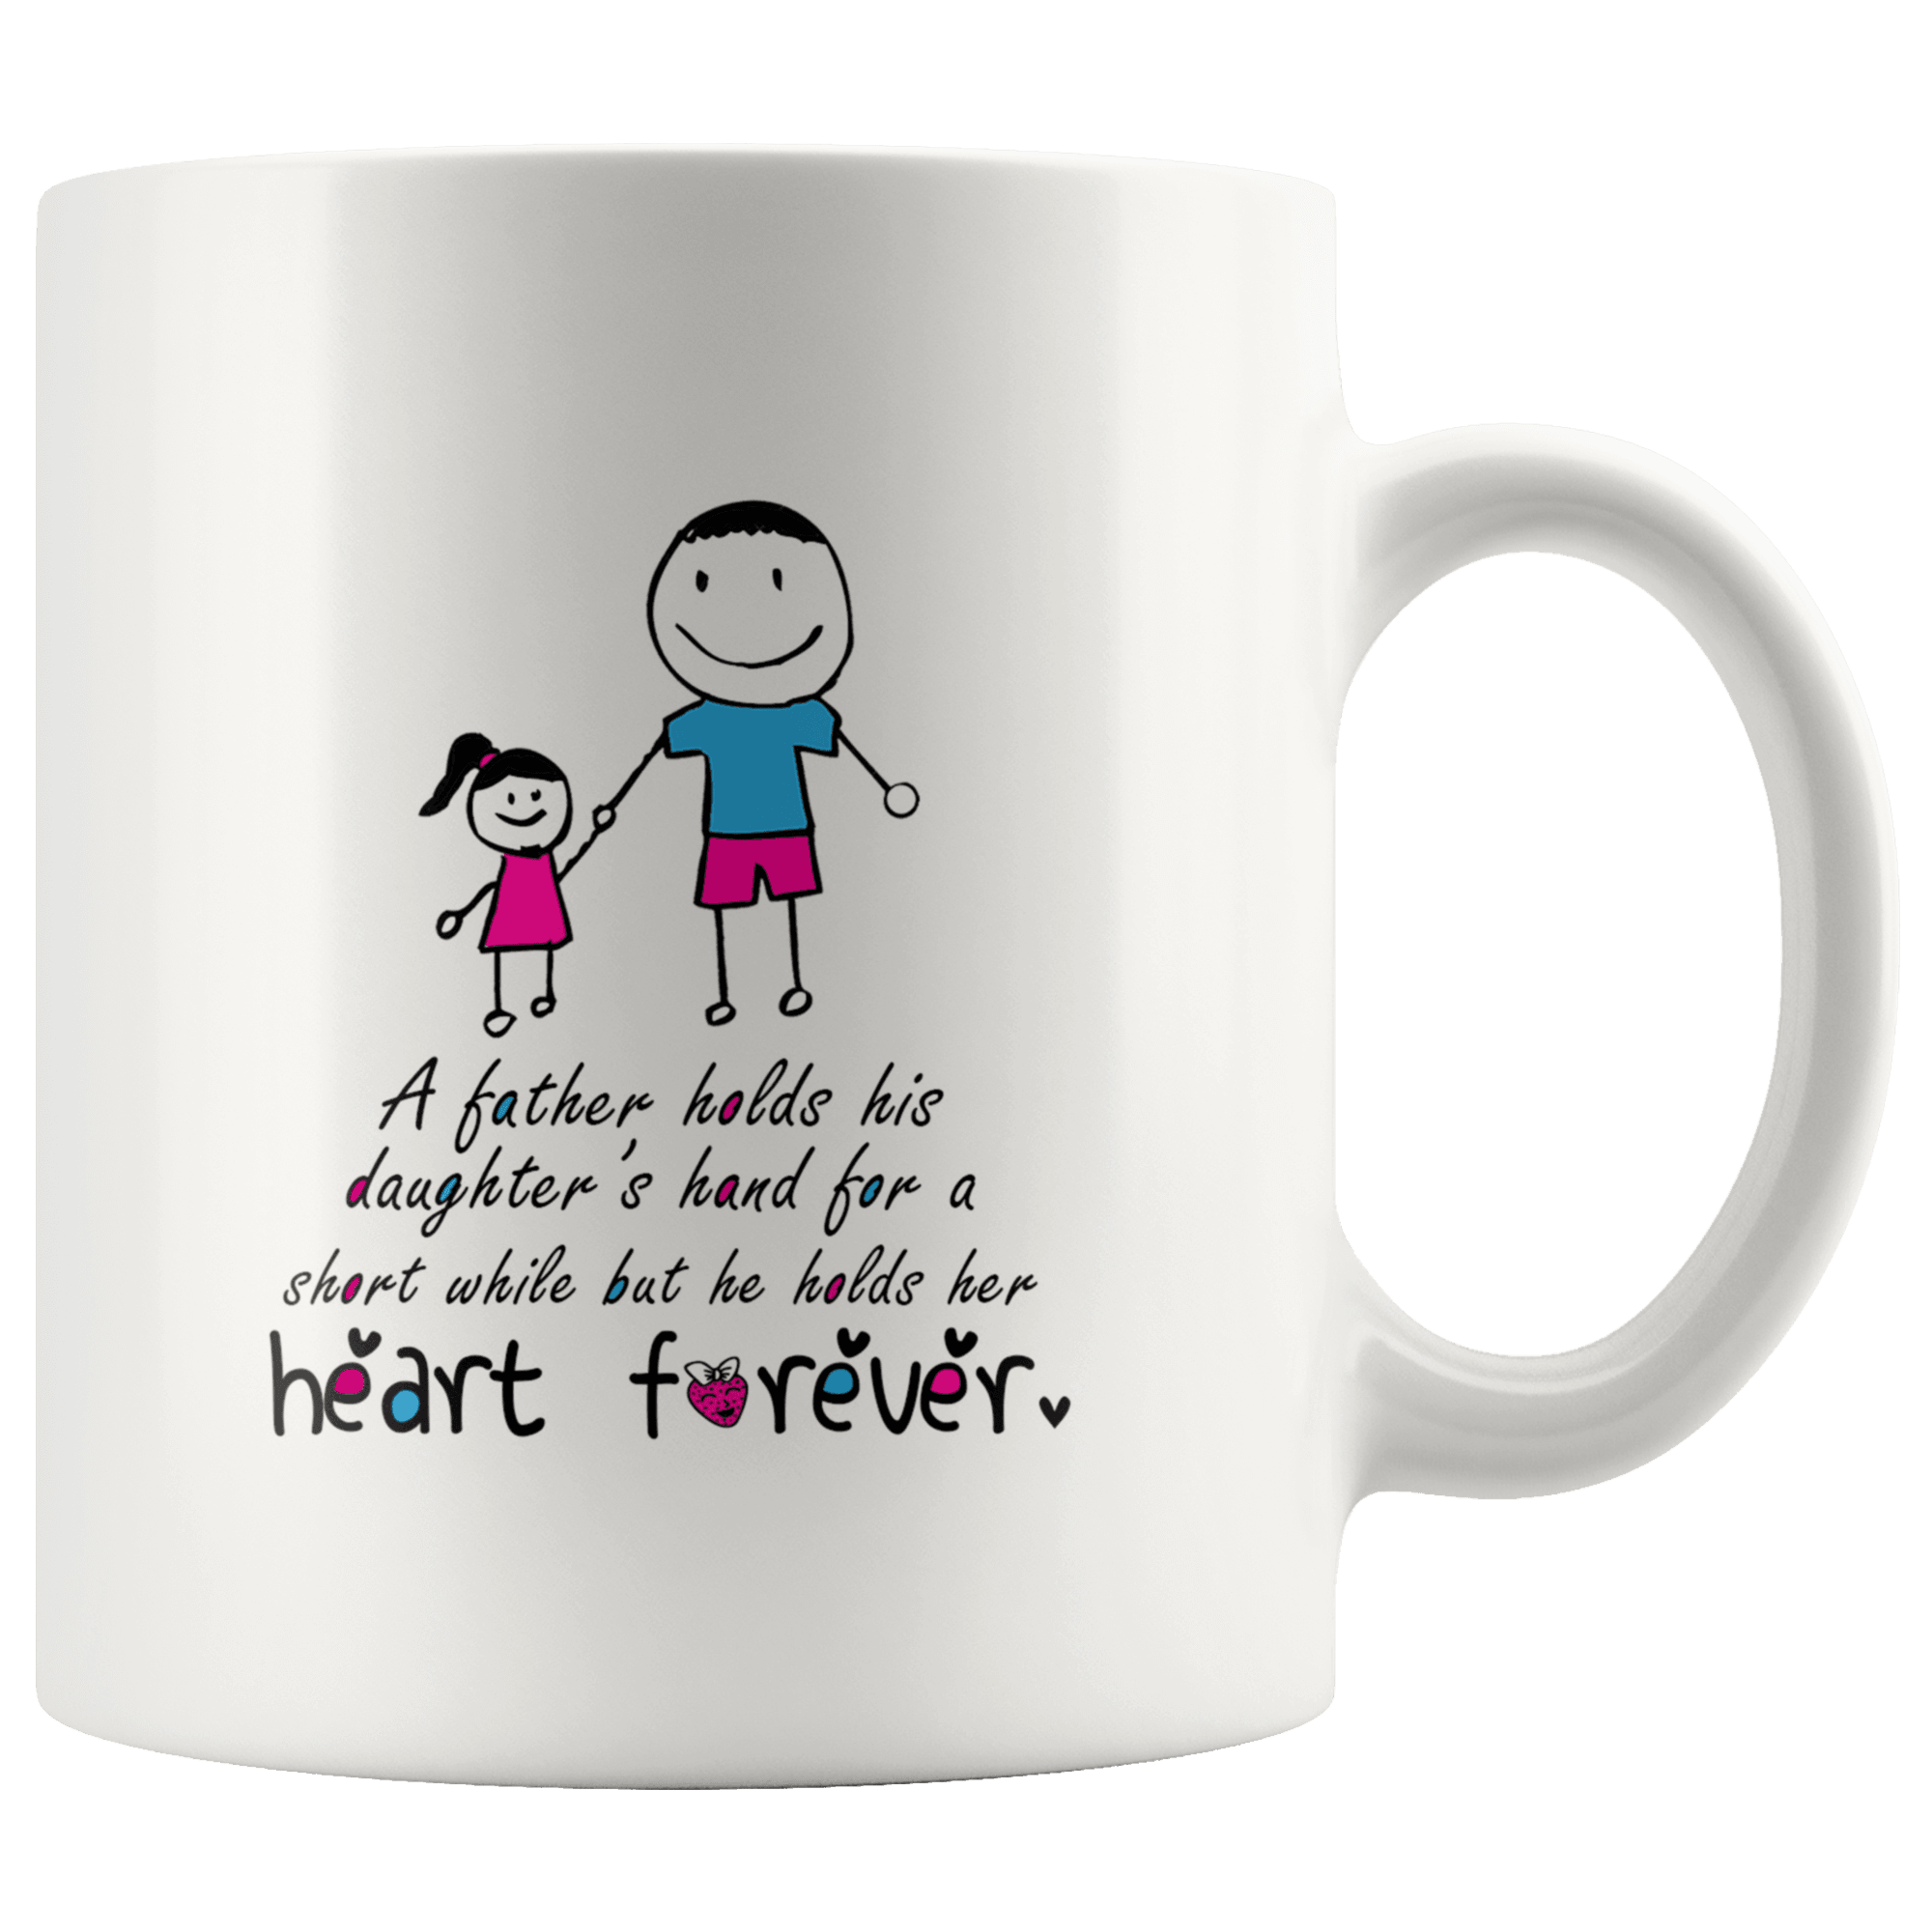 Great Coffee Mug For Father - A Father Holds His Daughter’s Hand For A Short While But He Holds Her Heart Forever - SPCM